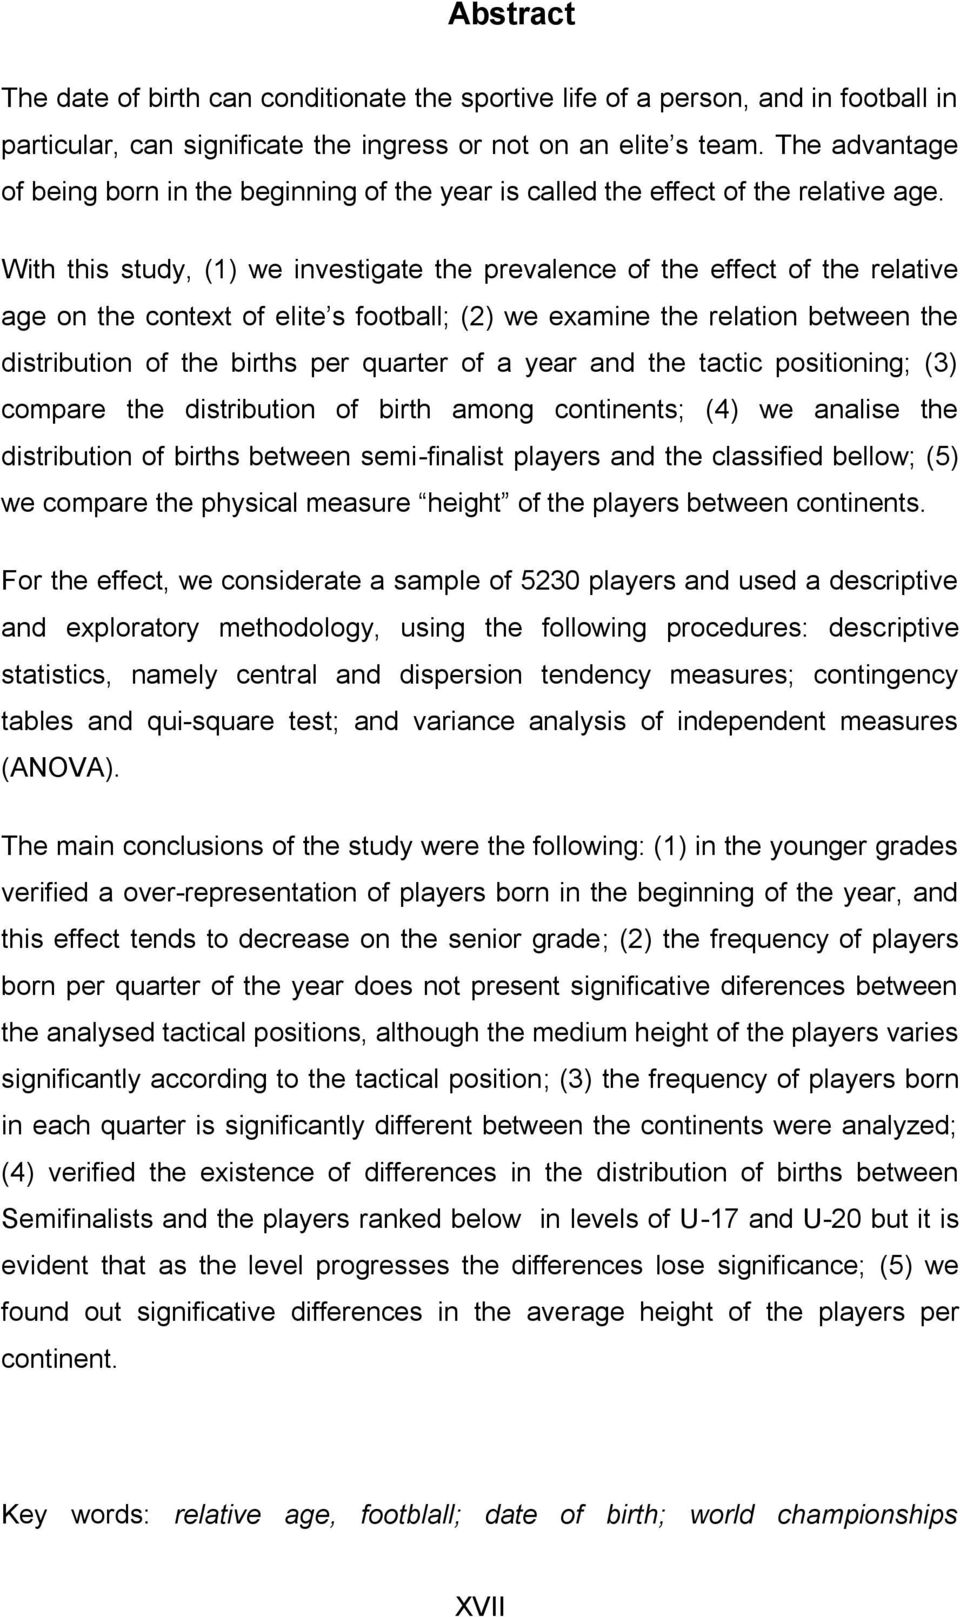 With this study, (1) we investigate the prevalence of the effect of the relative age on the context of elite s football; (2) we examine the relation between the distribution of the births per quarter